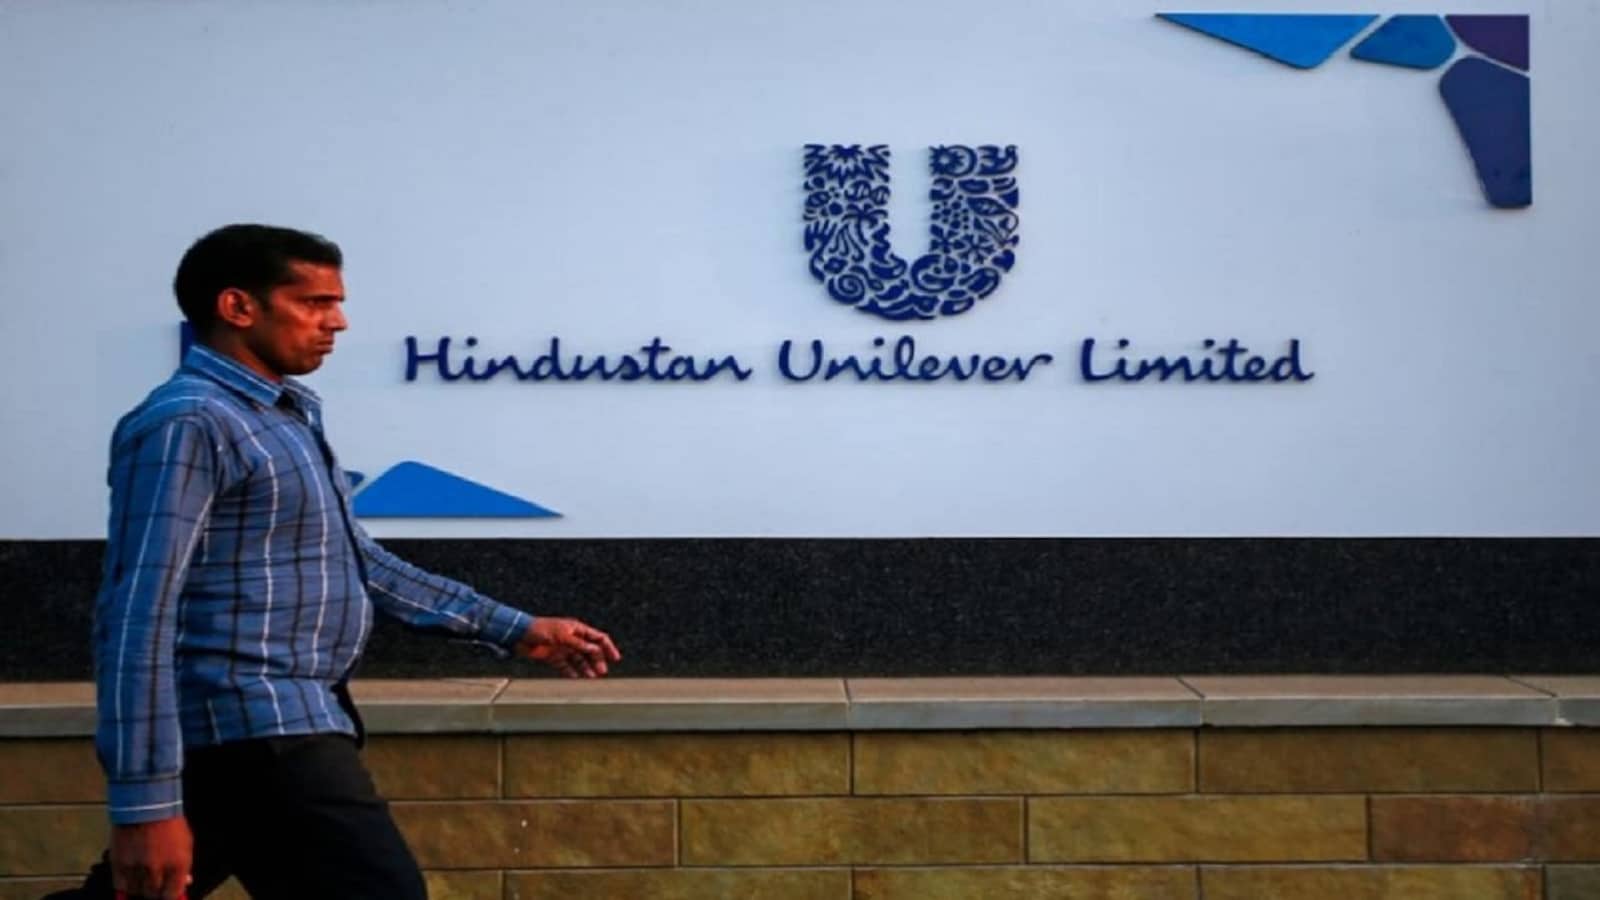 HUL seeks to expand market presence with pair of acquisitions in health and wellness segment